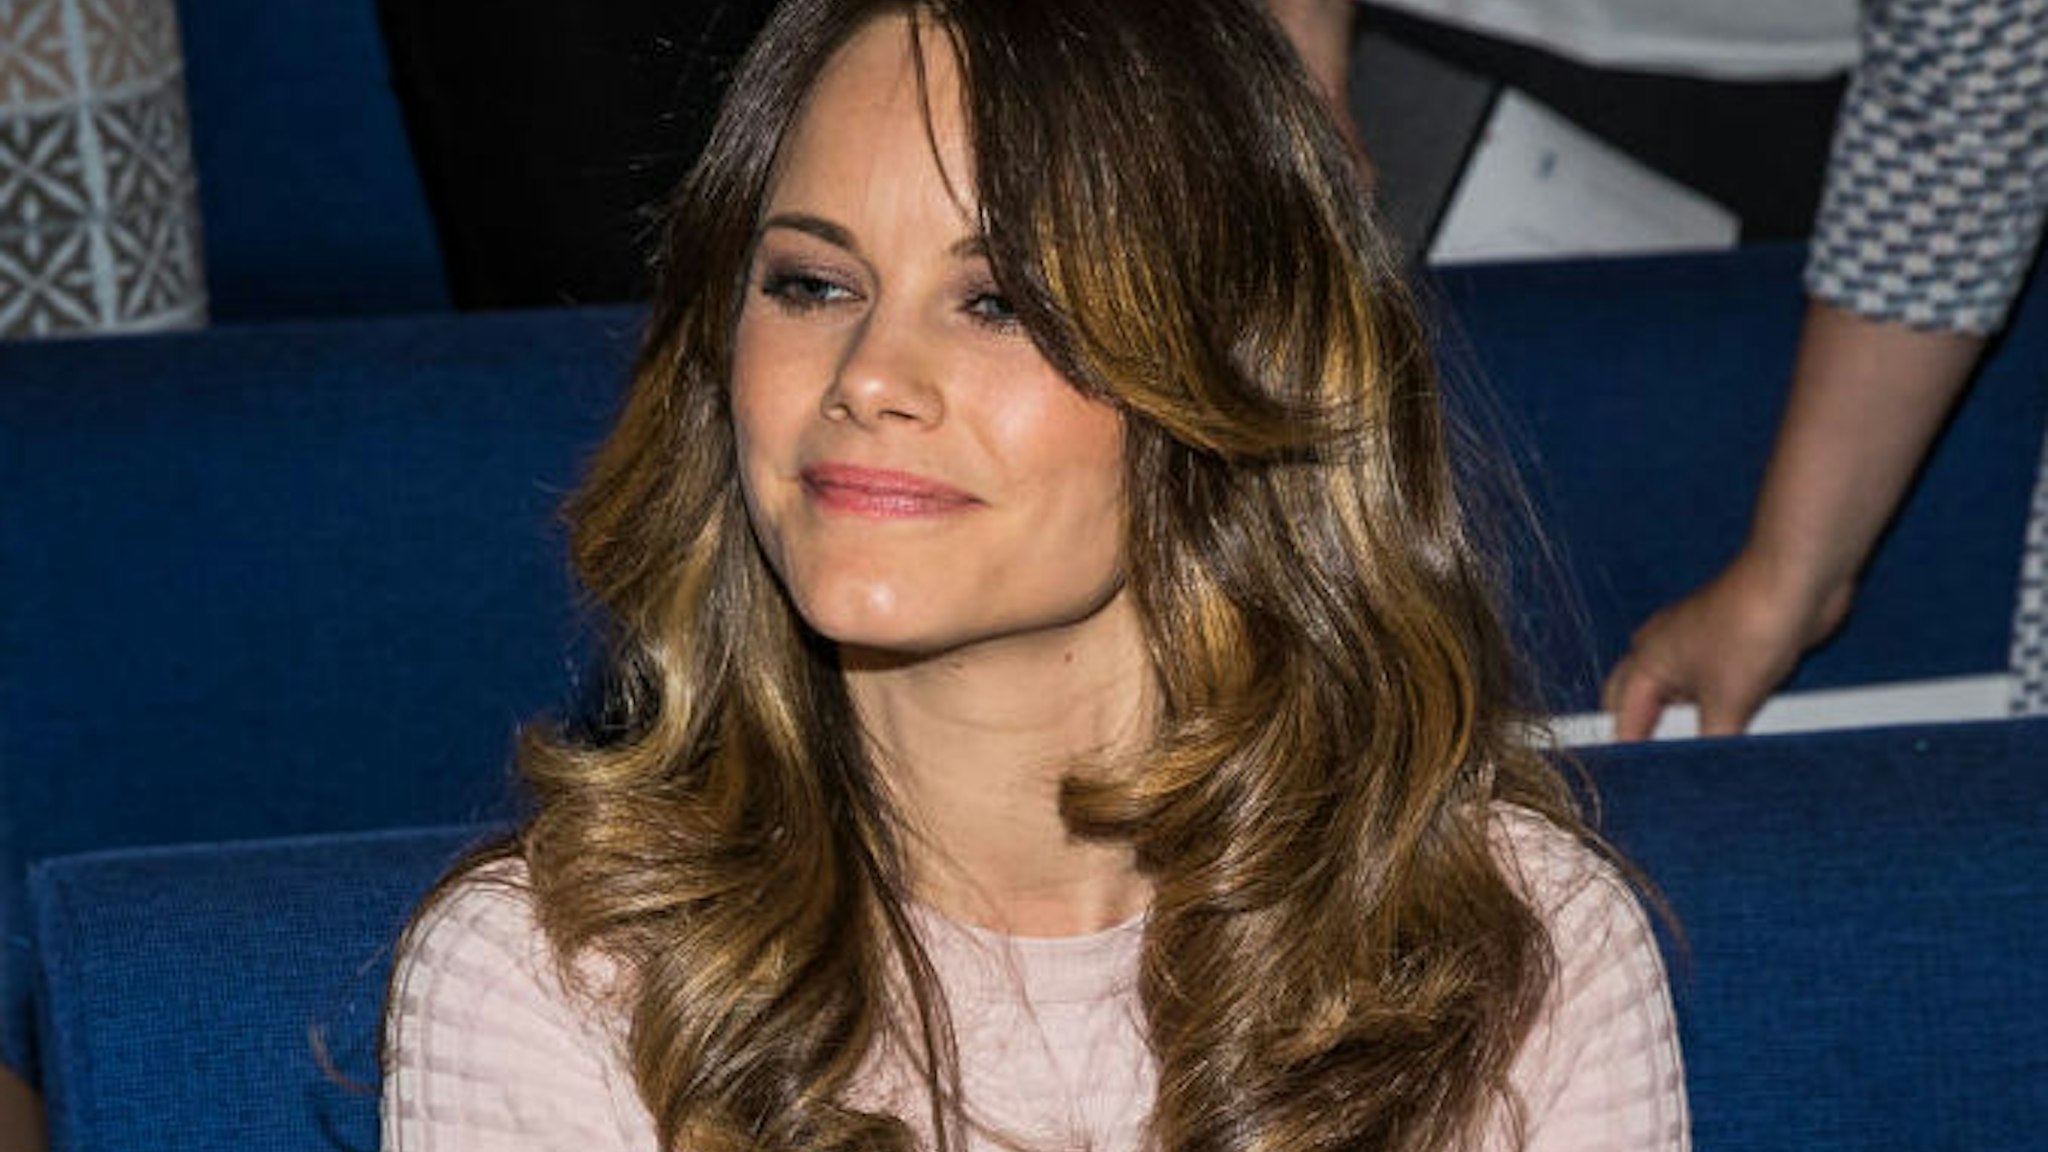 Princess Sofia of Sweden attends a symposium Recovery From Anorexia at Sophia Hemmet University on June 3, 2019 in Stockholm, Sweden.